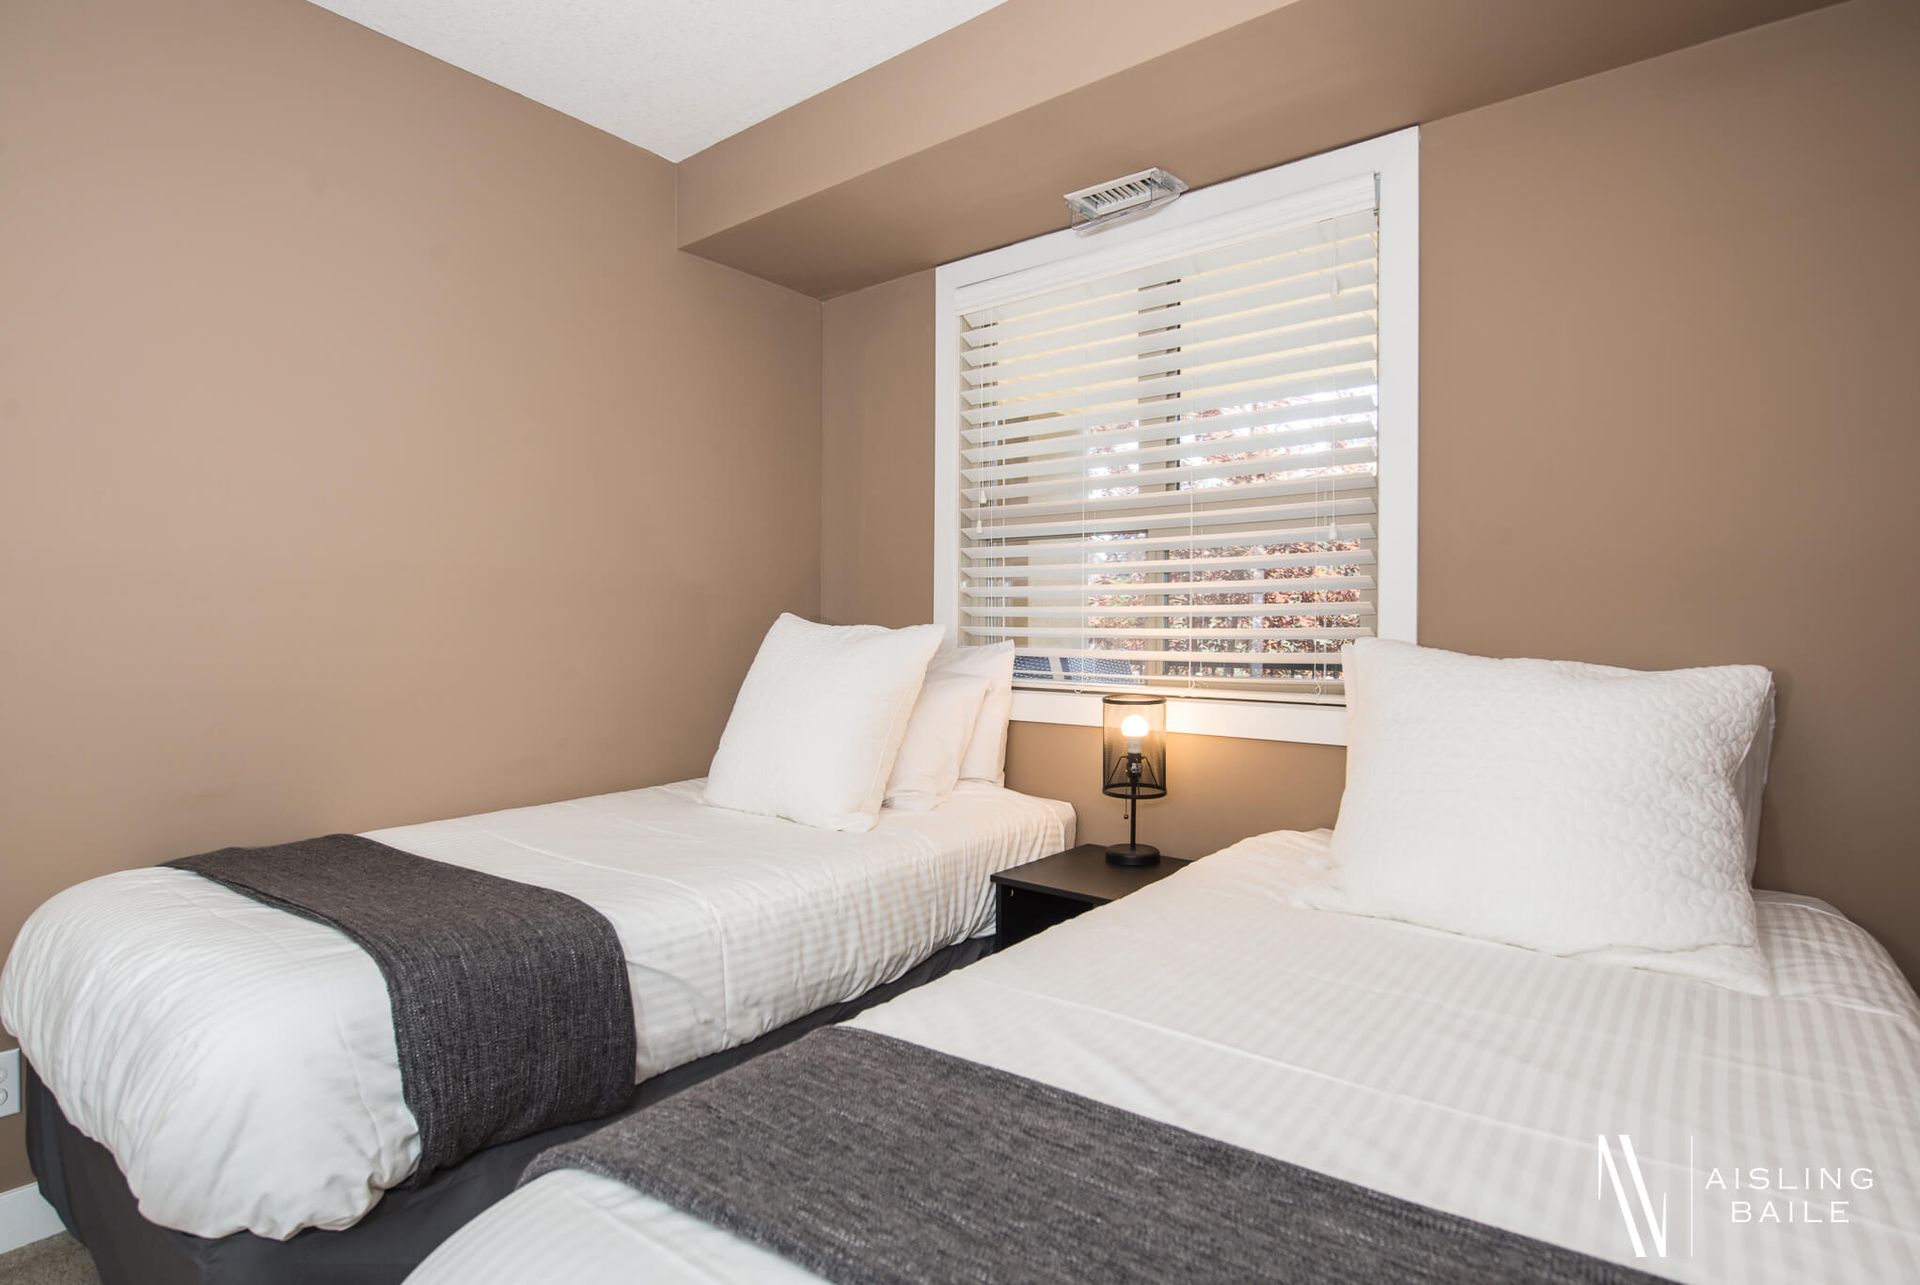 Second bedroom with two single beds at the Stylish condo of Lake Windermere Pointe in Invermere, a BC Vacation Rental hosted by Aisling Baile Property Management.